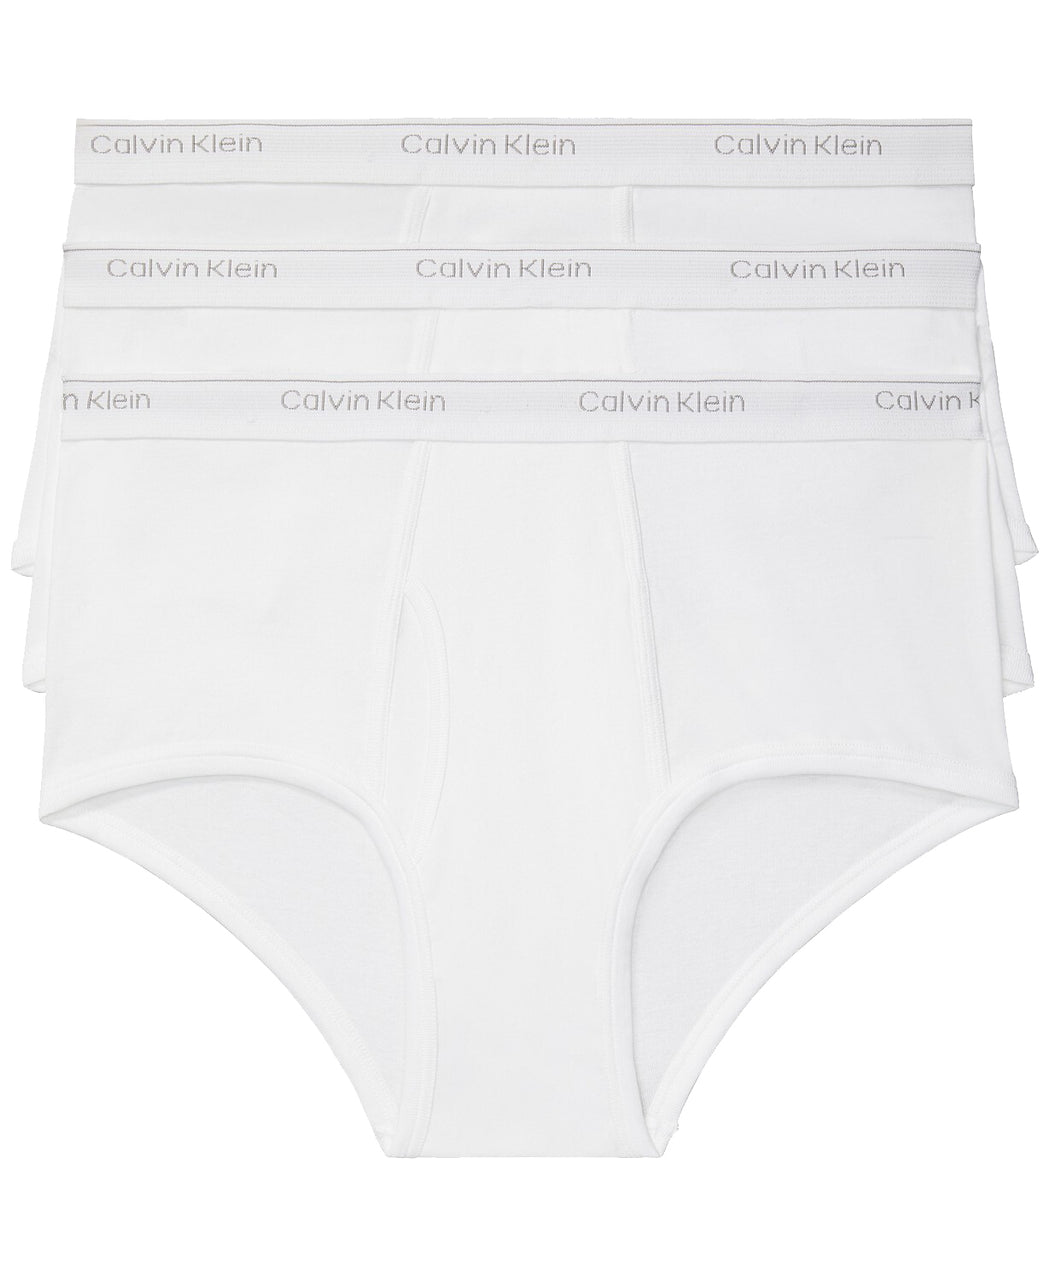 Calvin Klein Men\'s 3 Wanted Underwear – Cotton Pack Briefs and Big Tall Classics